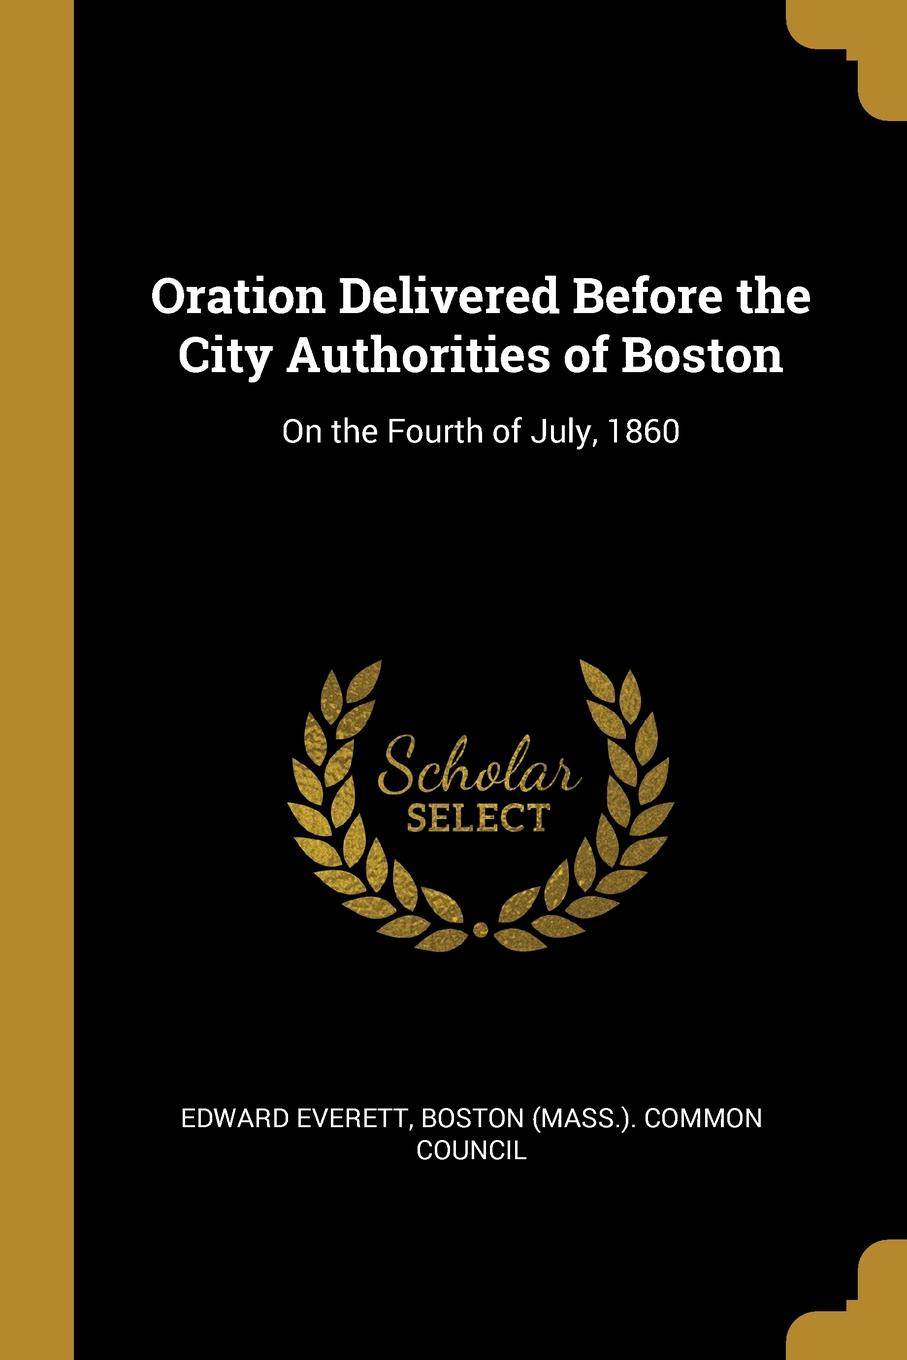 Oration Delivered Before the City Authorities of Boston. On the Fourth of July, 1860